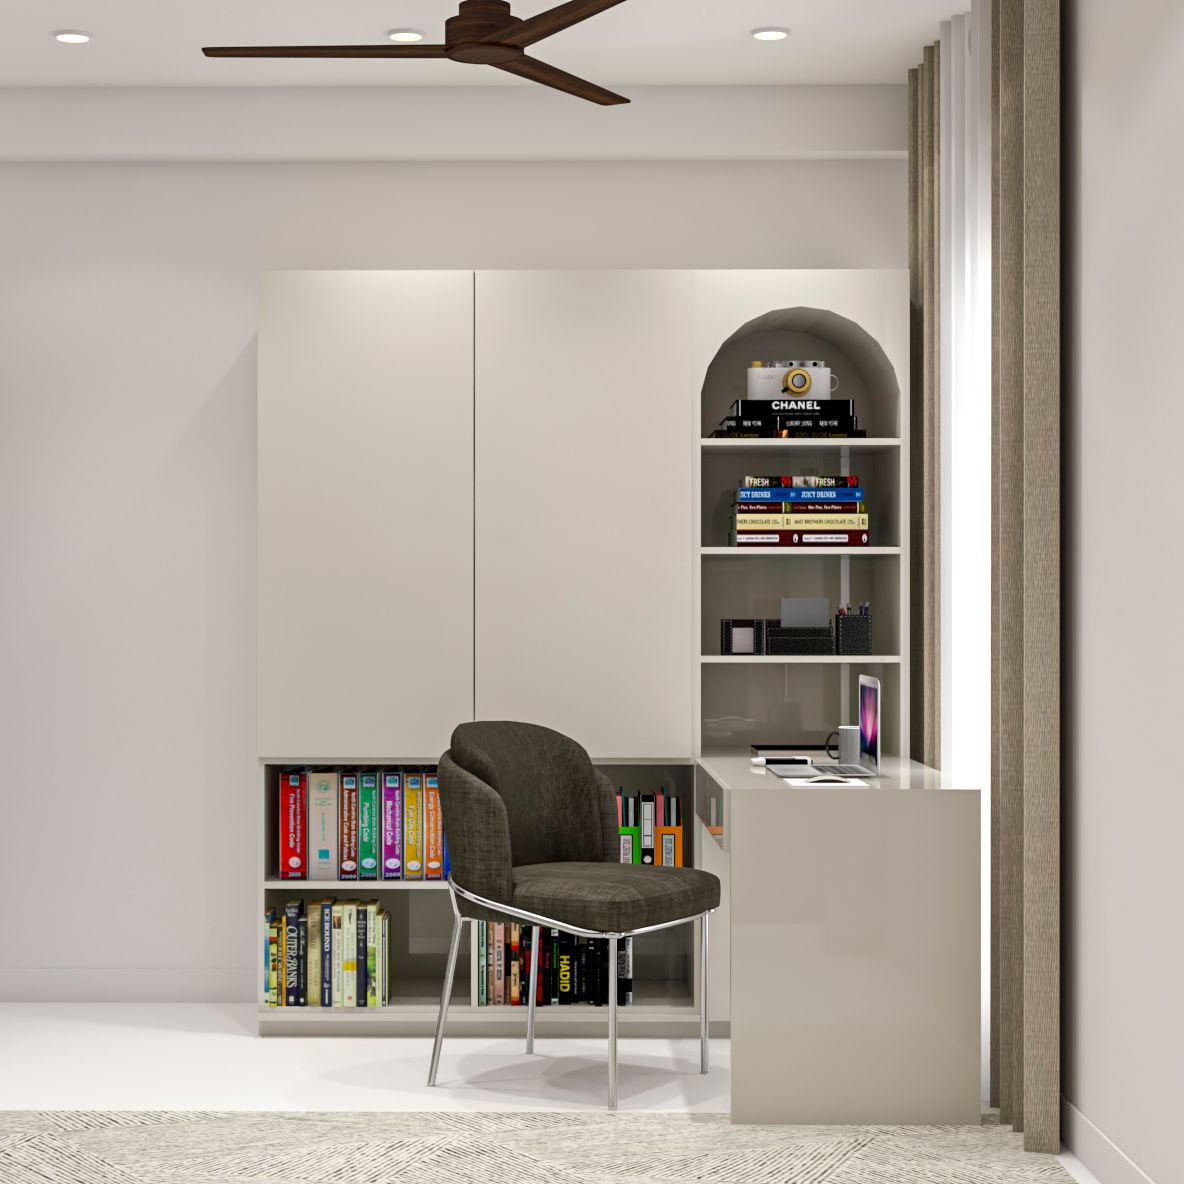 Contemporary Grey Study Room Design With Open Shelves For Storage